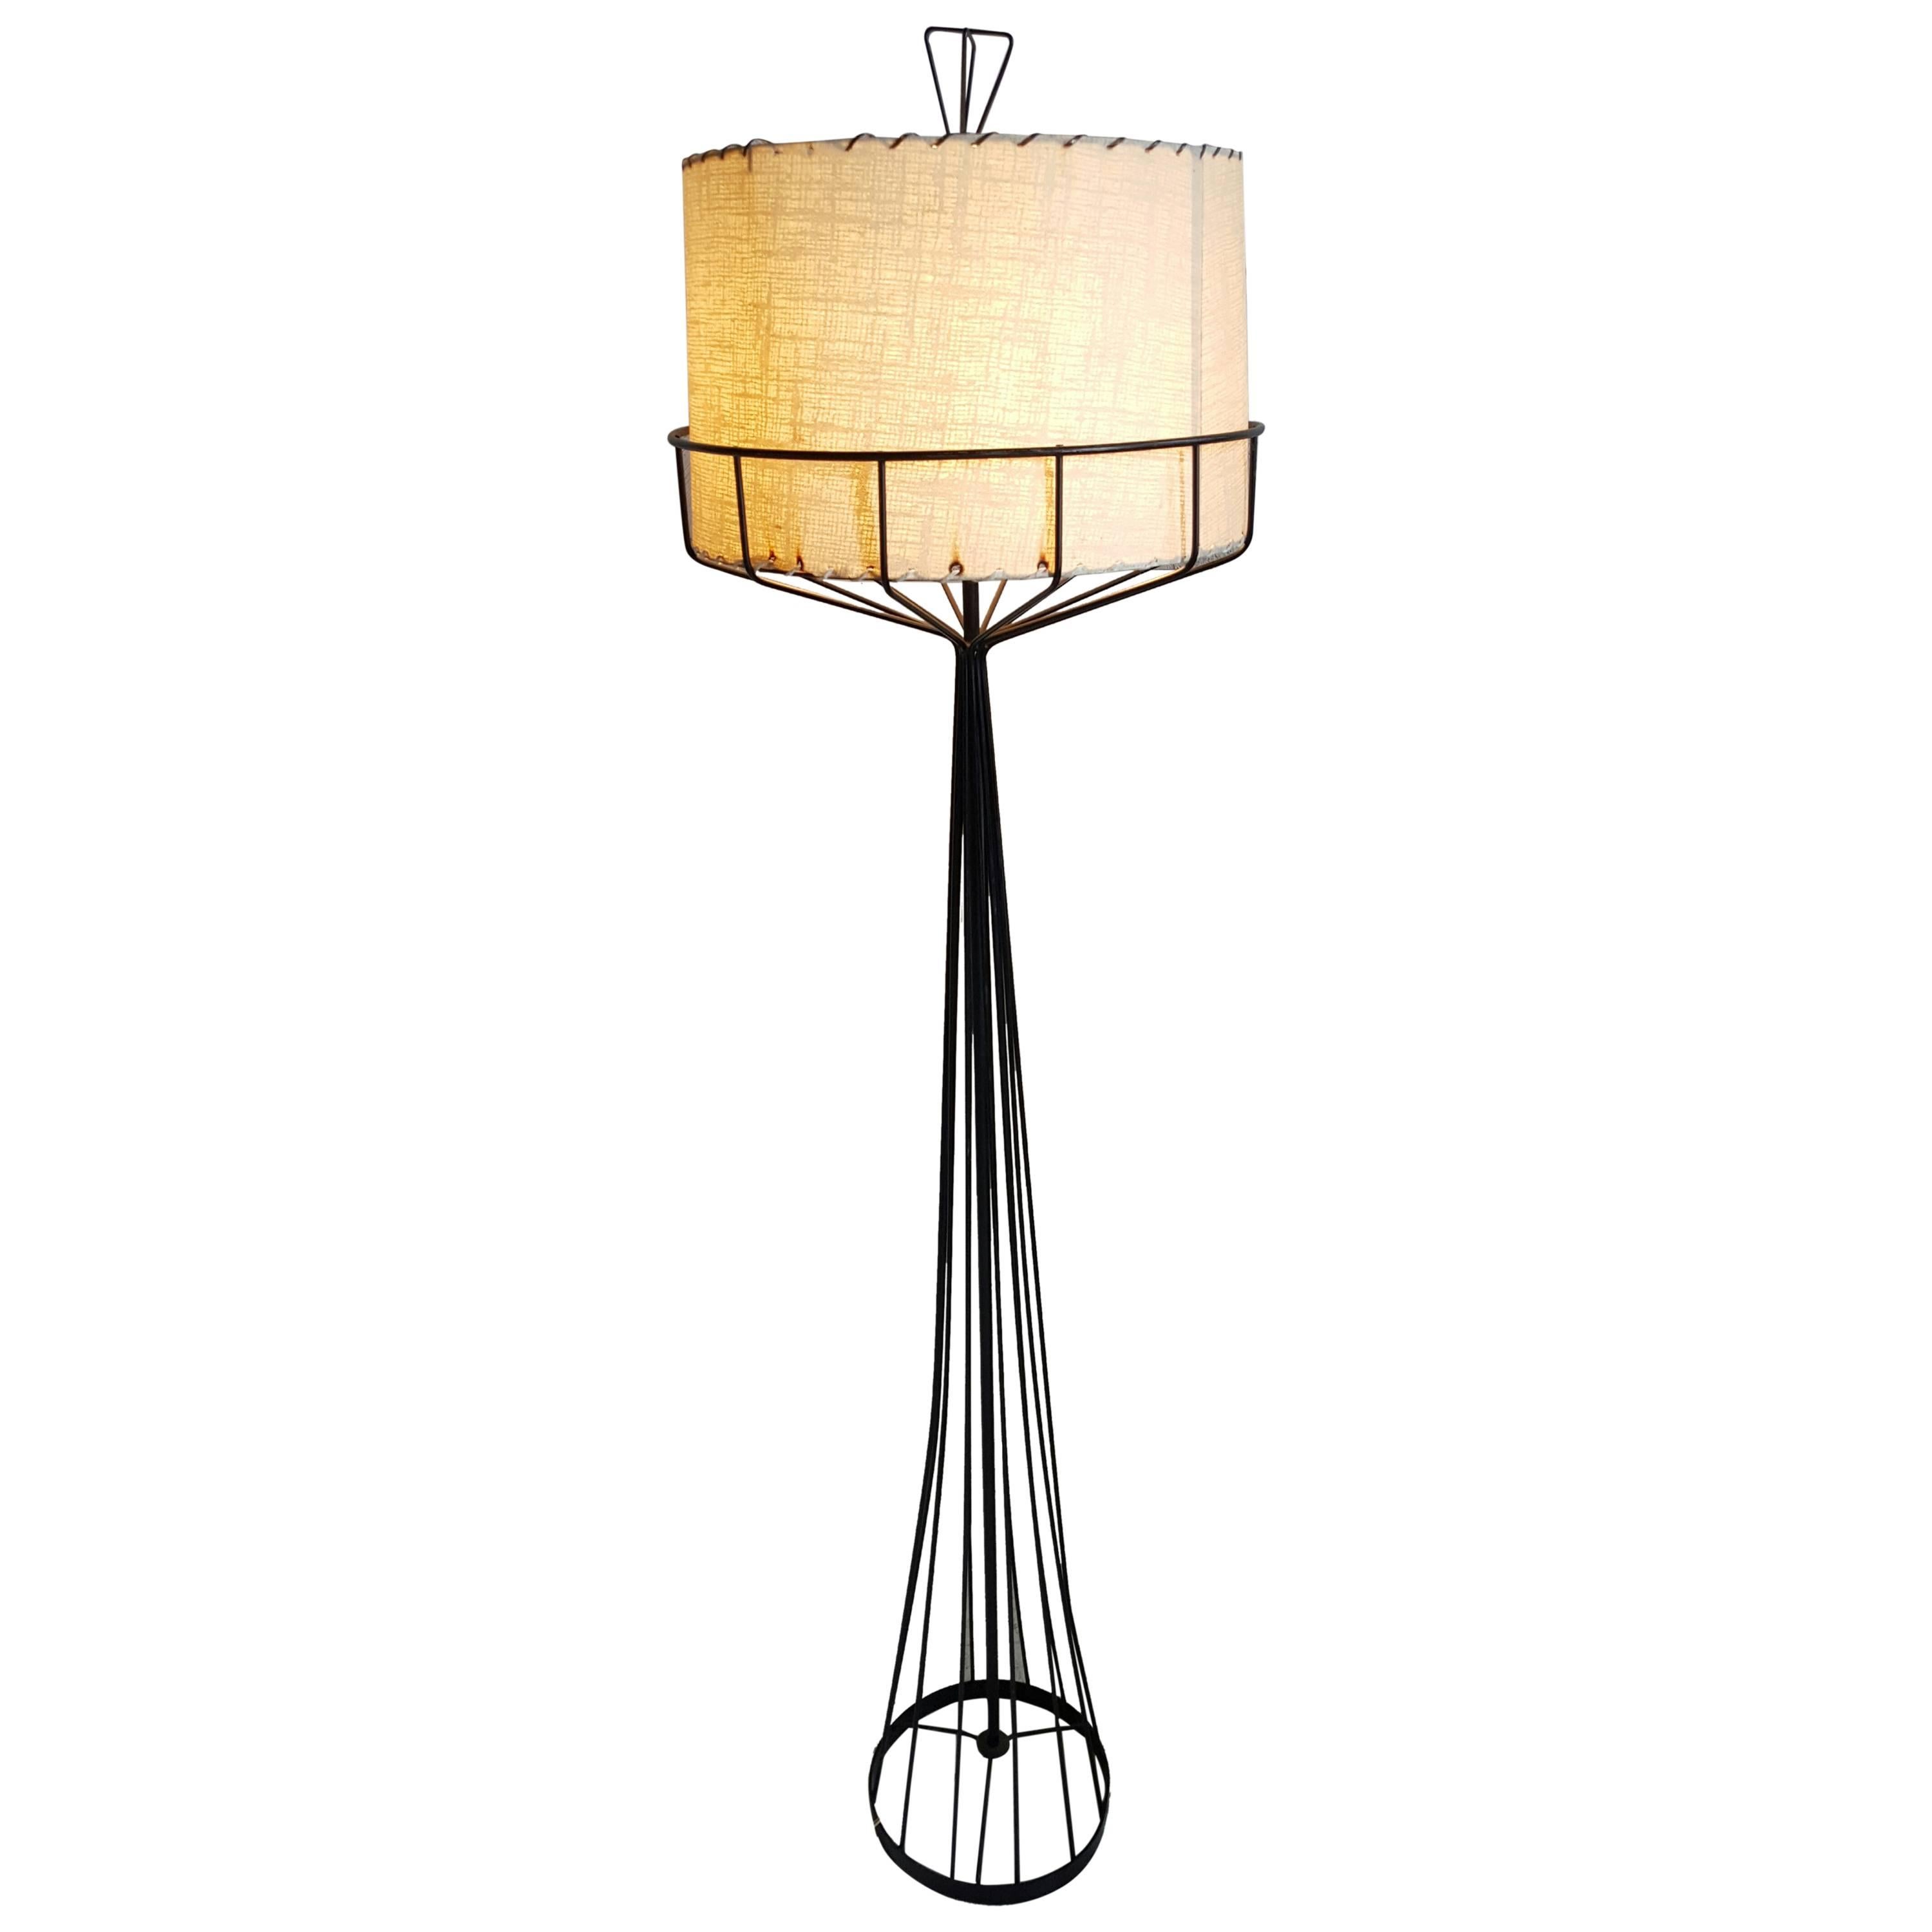 Tony Paul Floor Lamp from the Wire Series, Mid-Century Modern